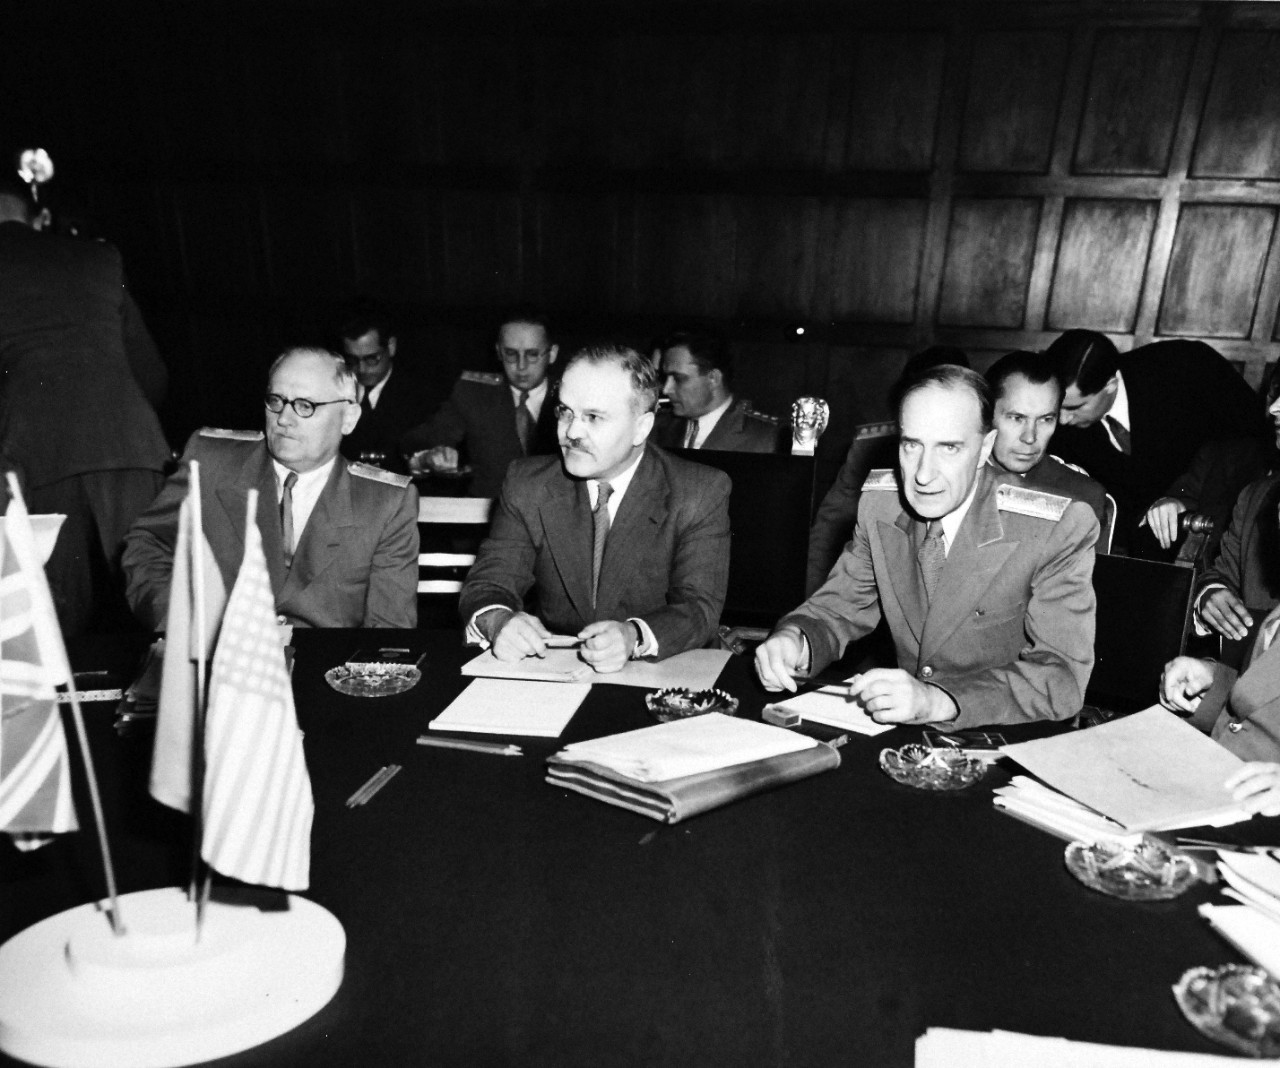 80-G-700118: Potsdam Conference, July-August 1945.  The “Little Three” (Foreign Ministers) meeting in the same conference room as the Heads of States at Potsdam, Germany.  Foreign Commissar V. Molotov in the center.  Photographed released July 24, 1945.  Official U.S. Navy Photograph, now in the collections of the National Archives.  (2016/02/23).